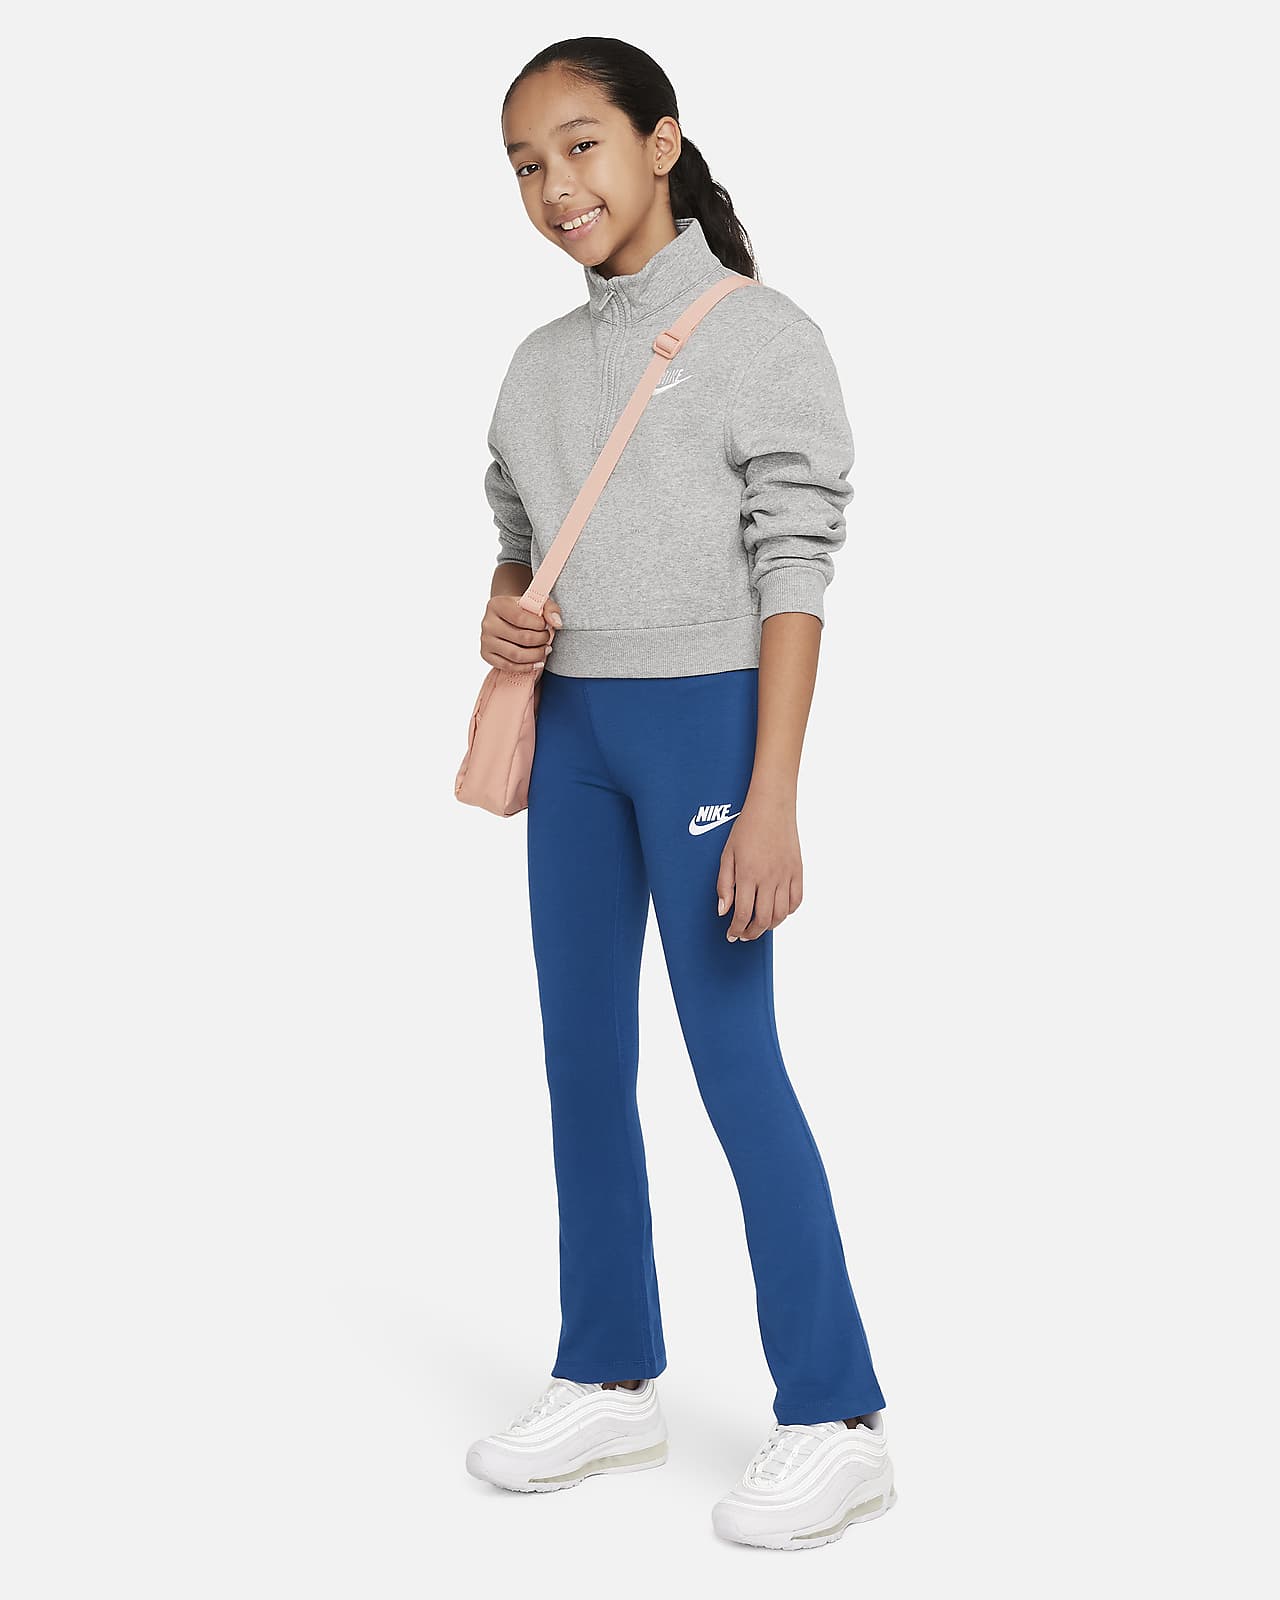 Sportswear Favorite Tight Flare Leggings - Teens by Nike Online, THE  ICONIC